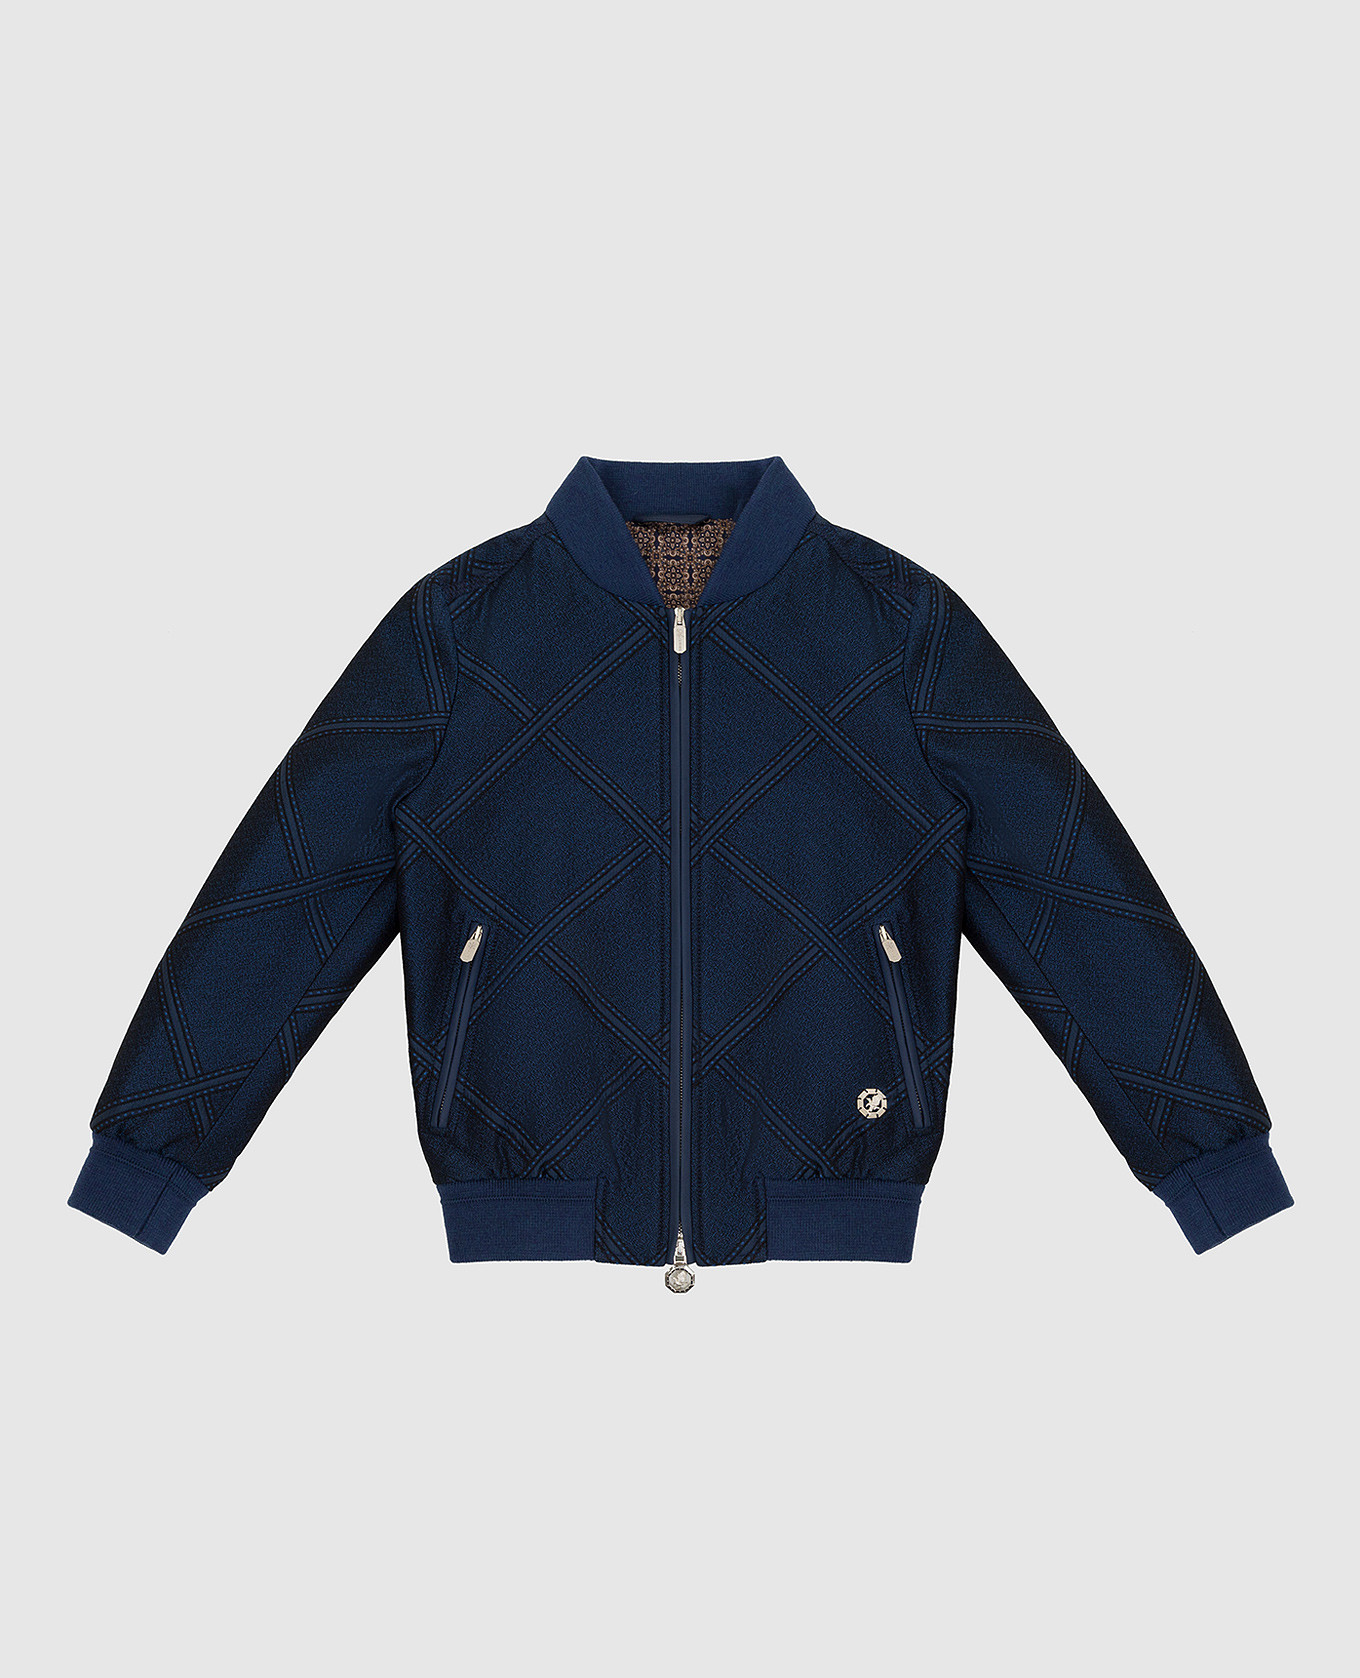 Children's bomber jacket in a pattern with leather inserts